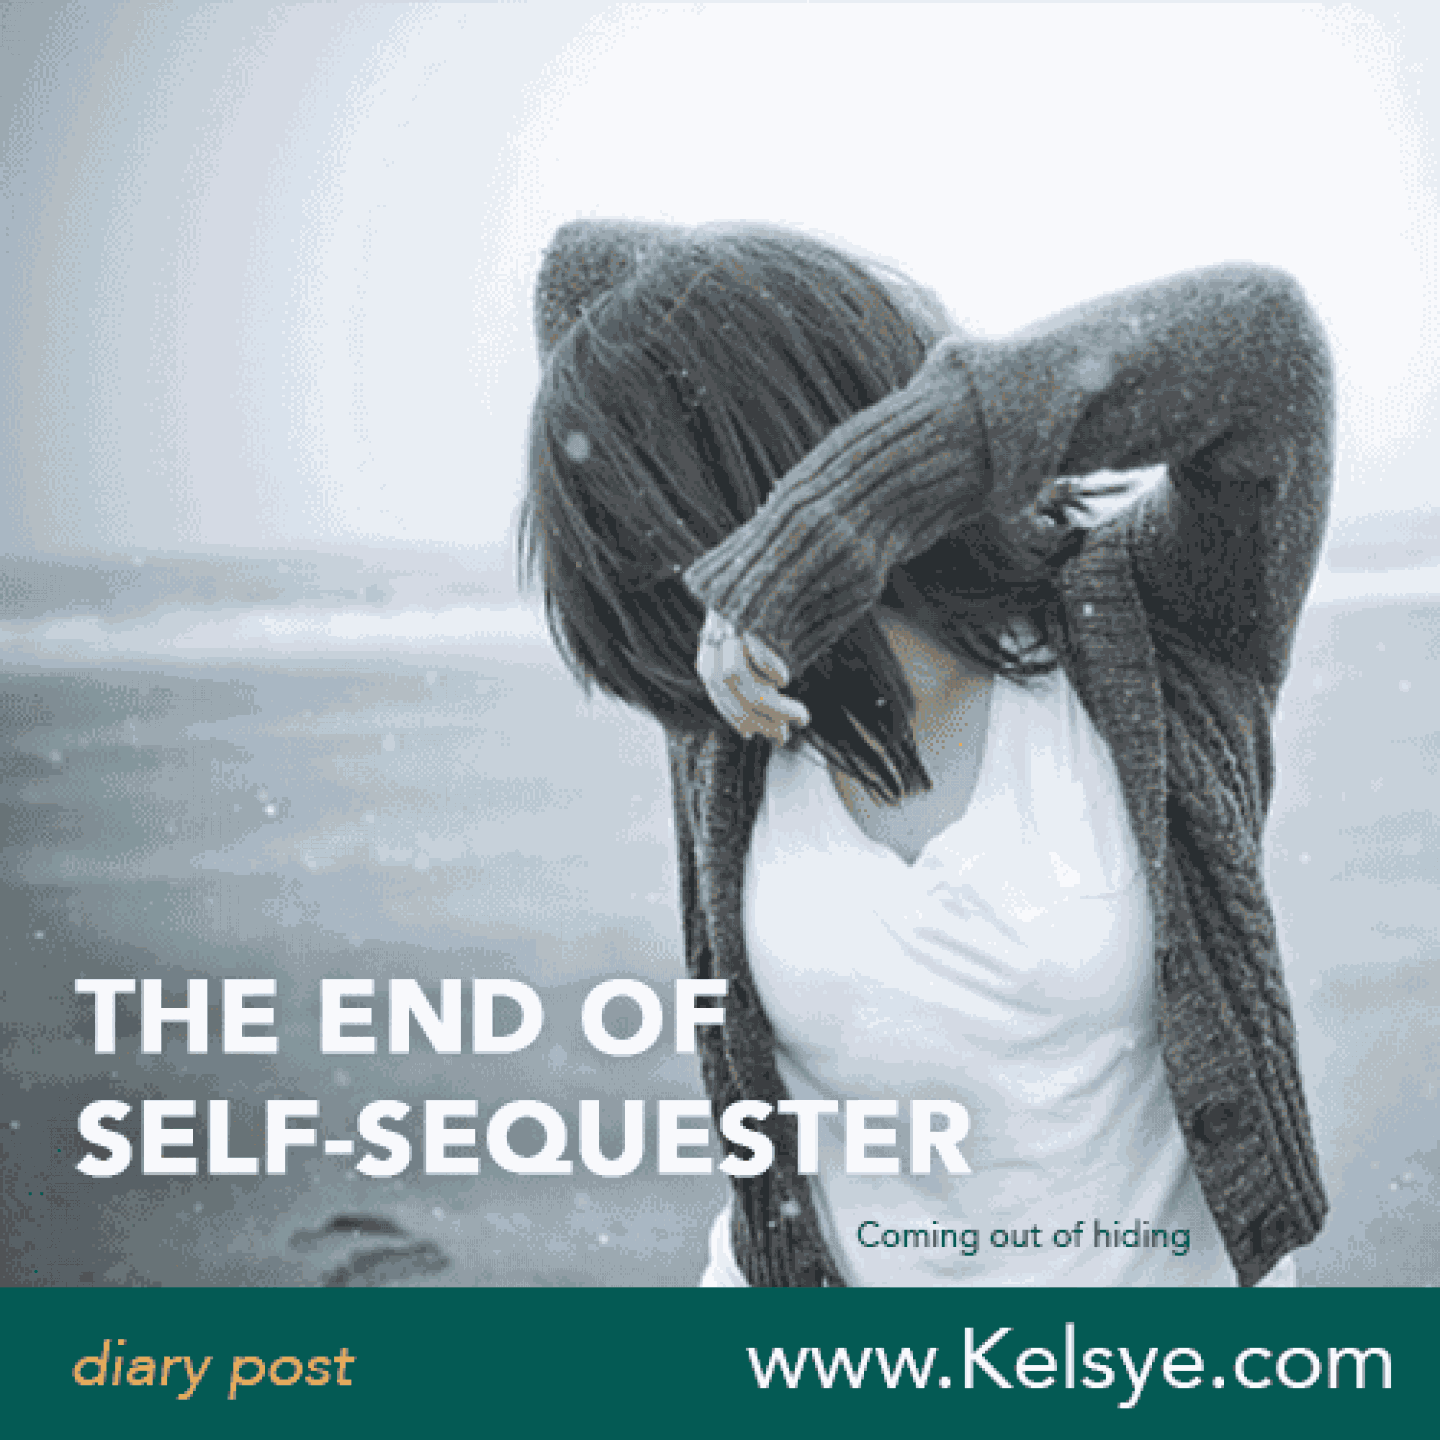 080315_End_of_self_sequester